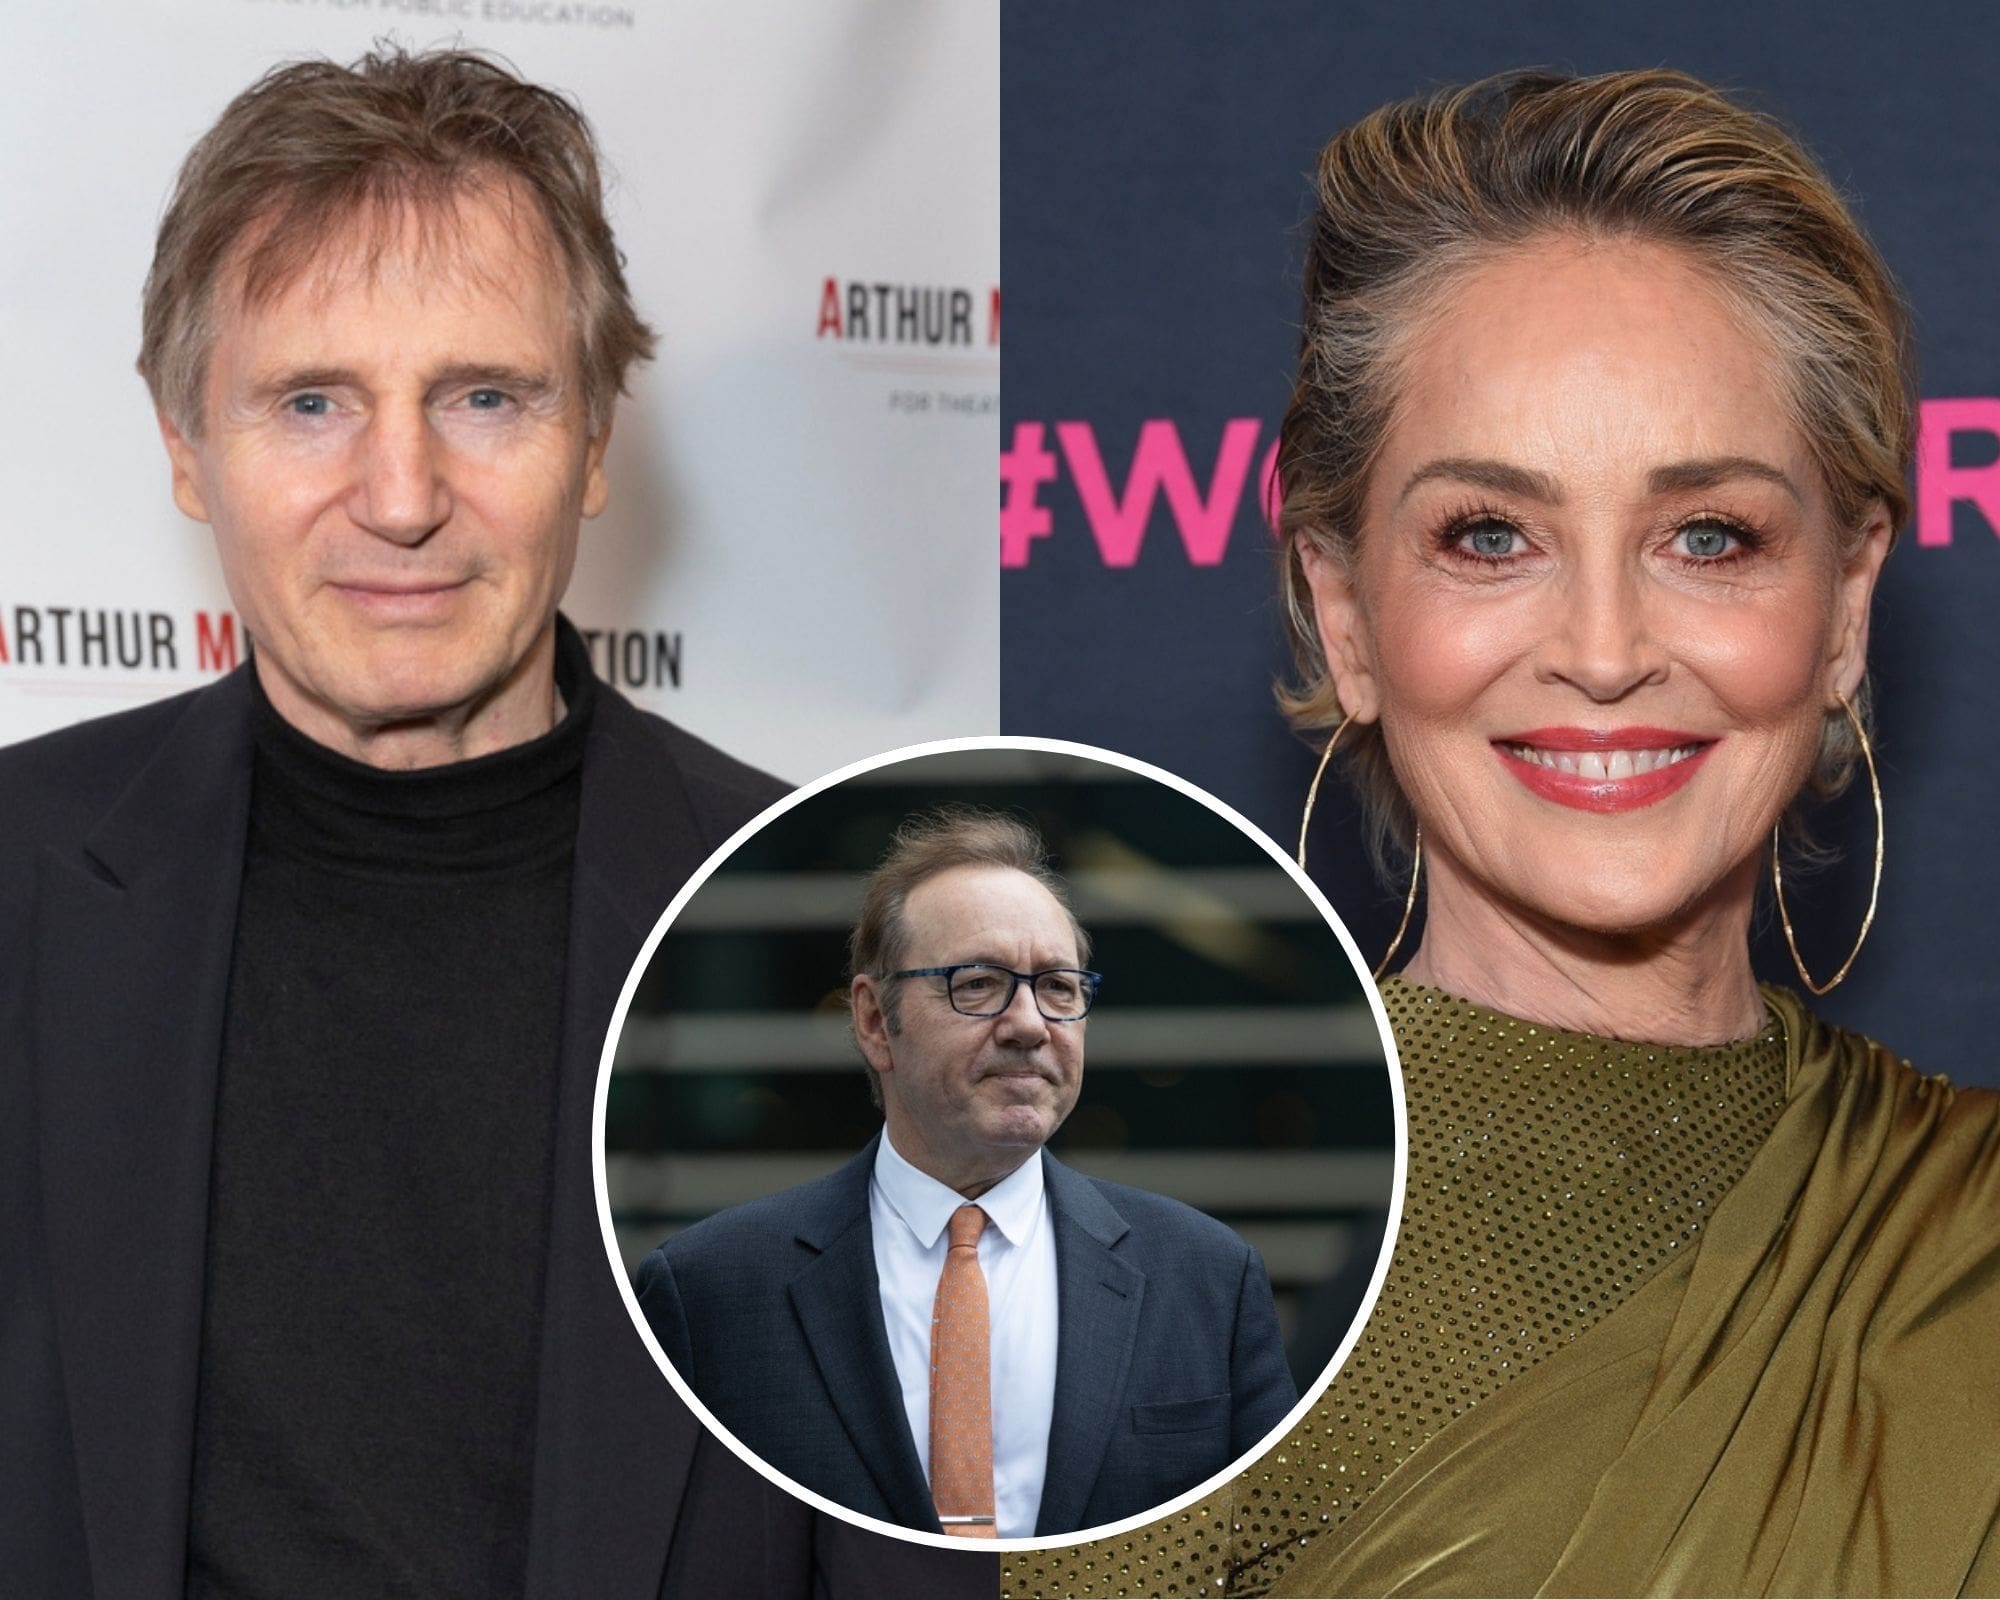 Liam Neeson and Sharon Stone Defend Kevin Spacey, Both Want Him Acting Again